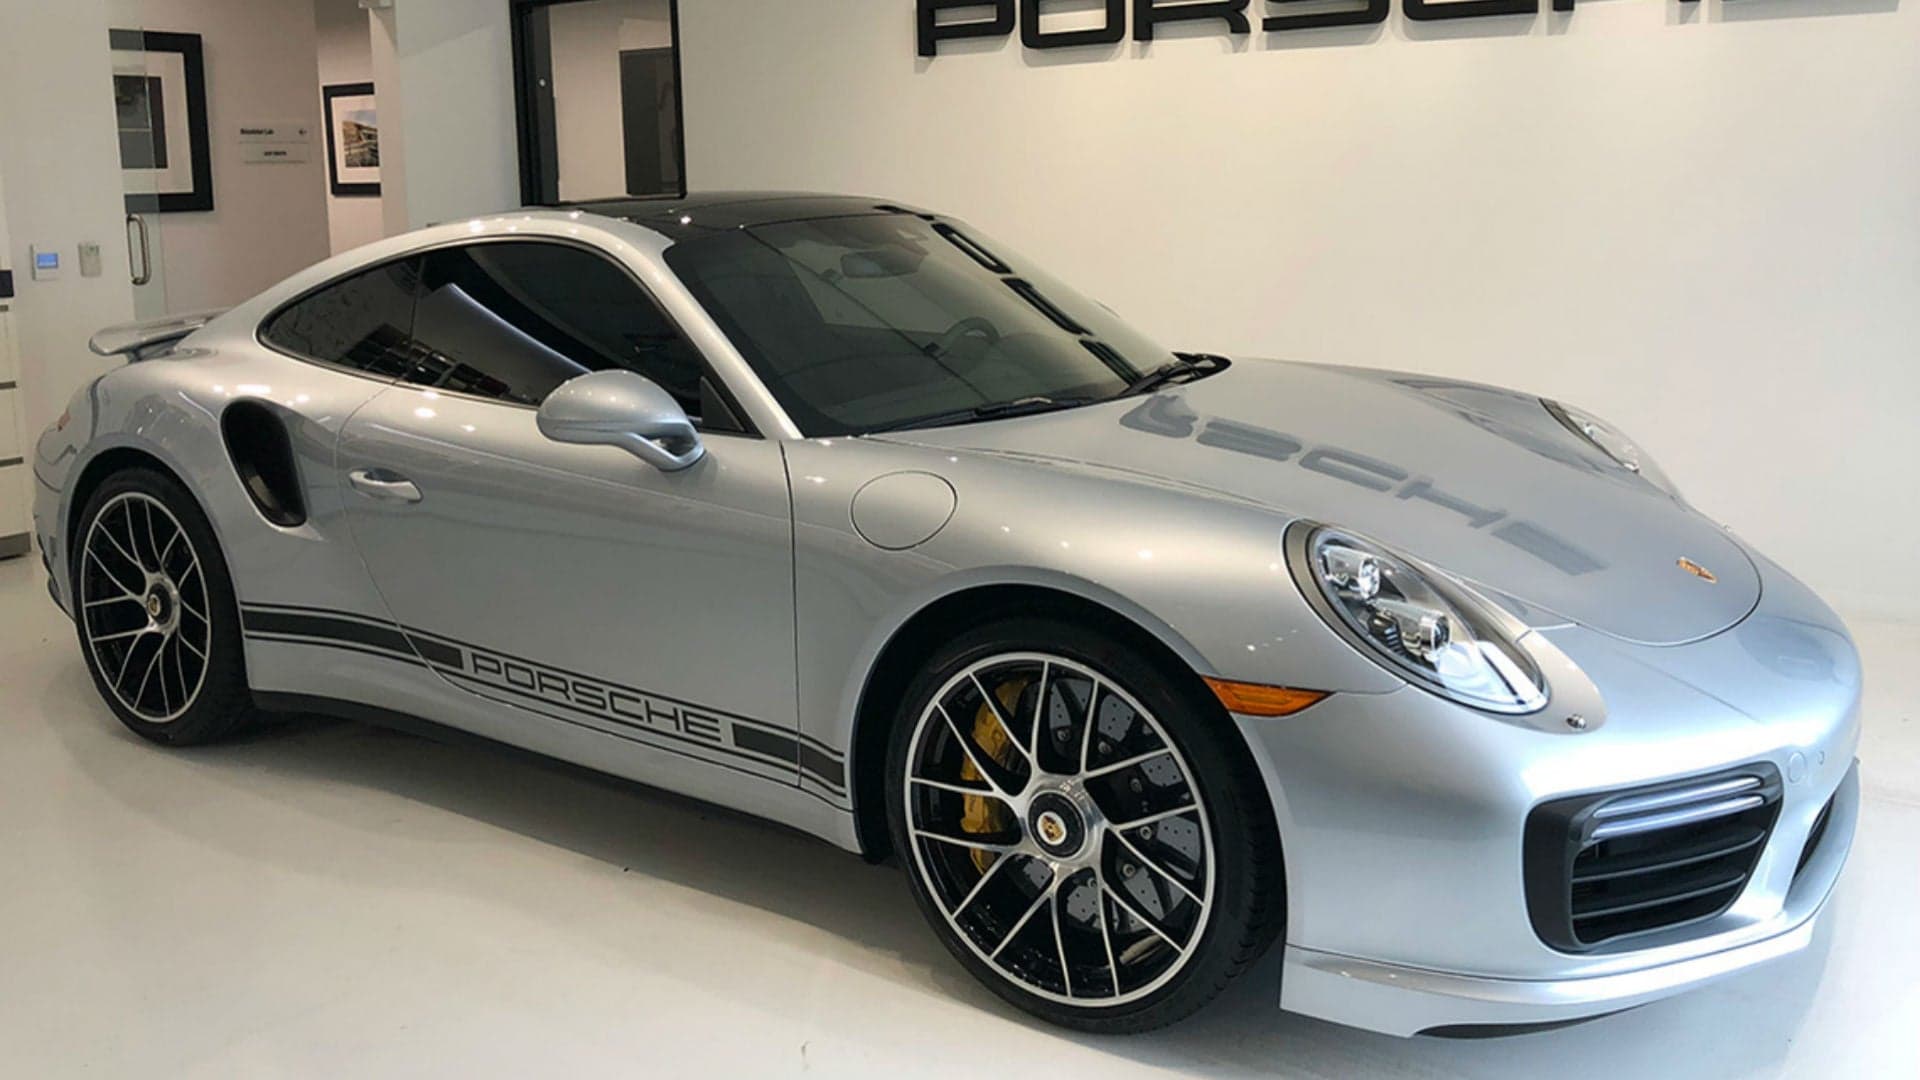 Pick Up Your New Porsche at the Porsche Experience Center in Los Angeles